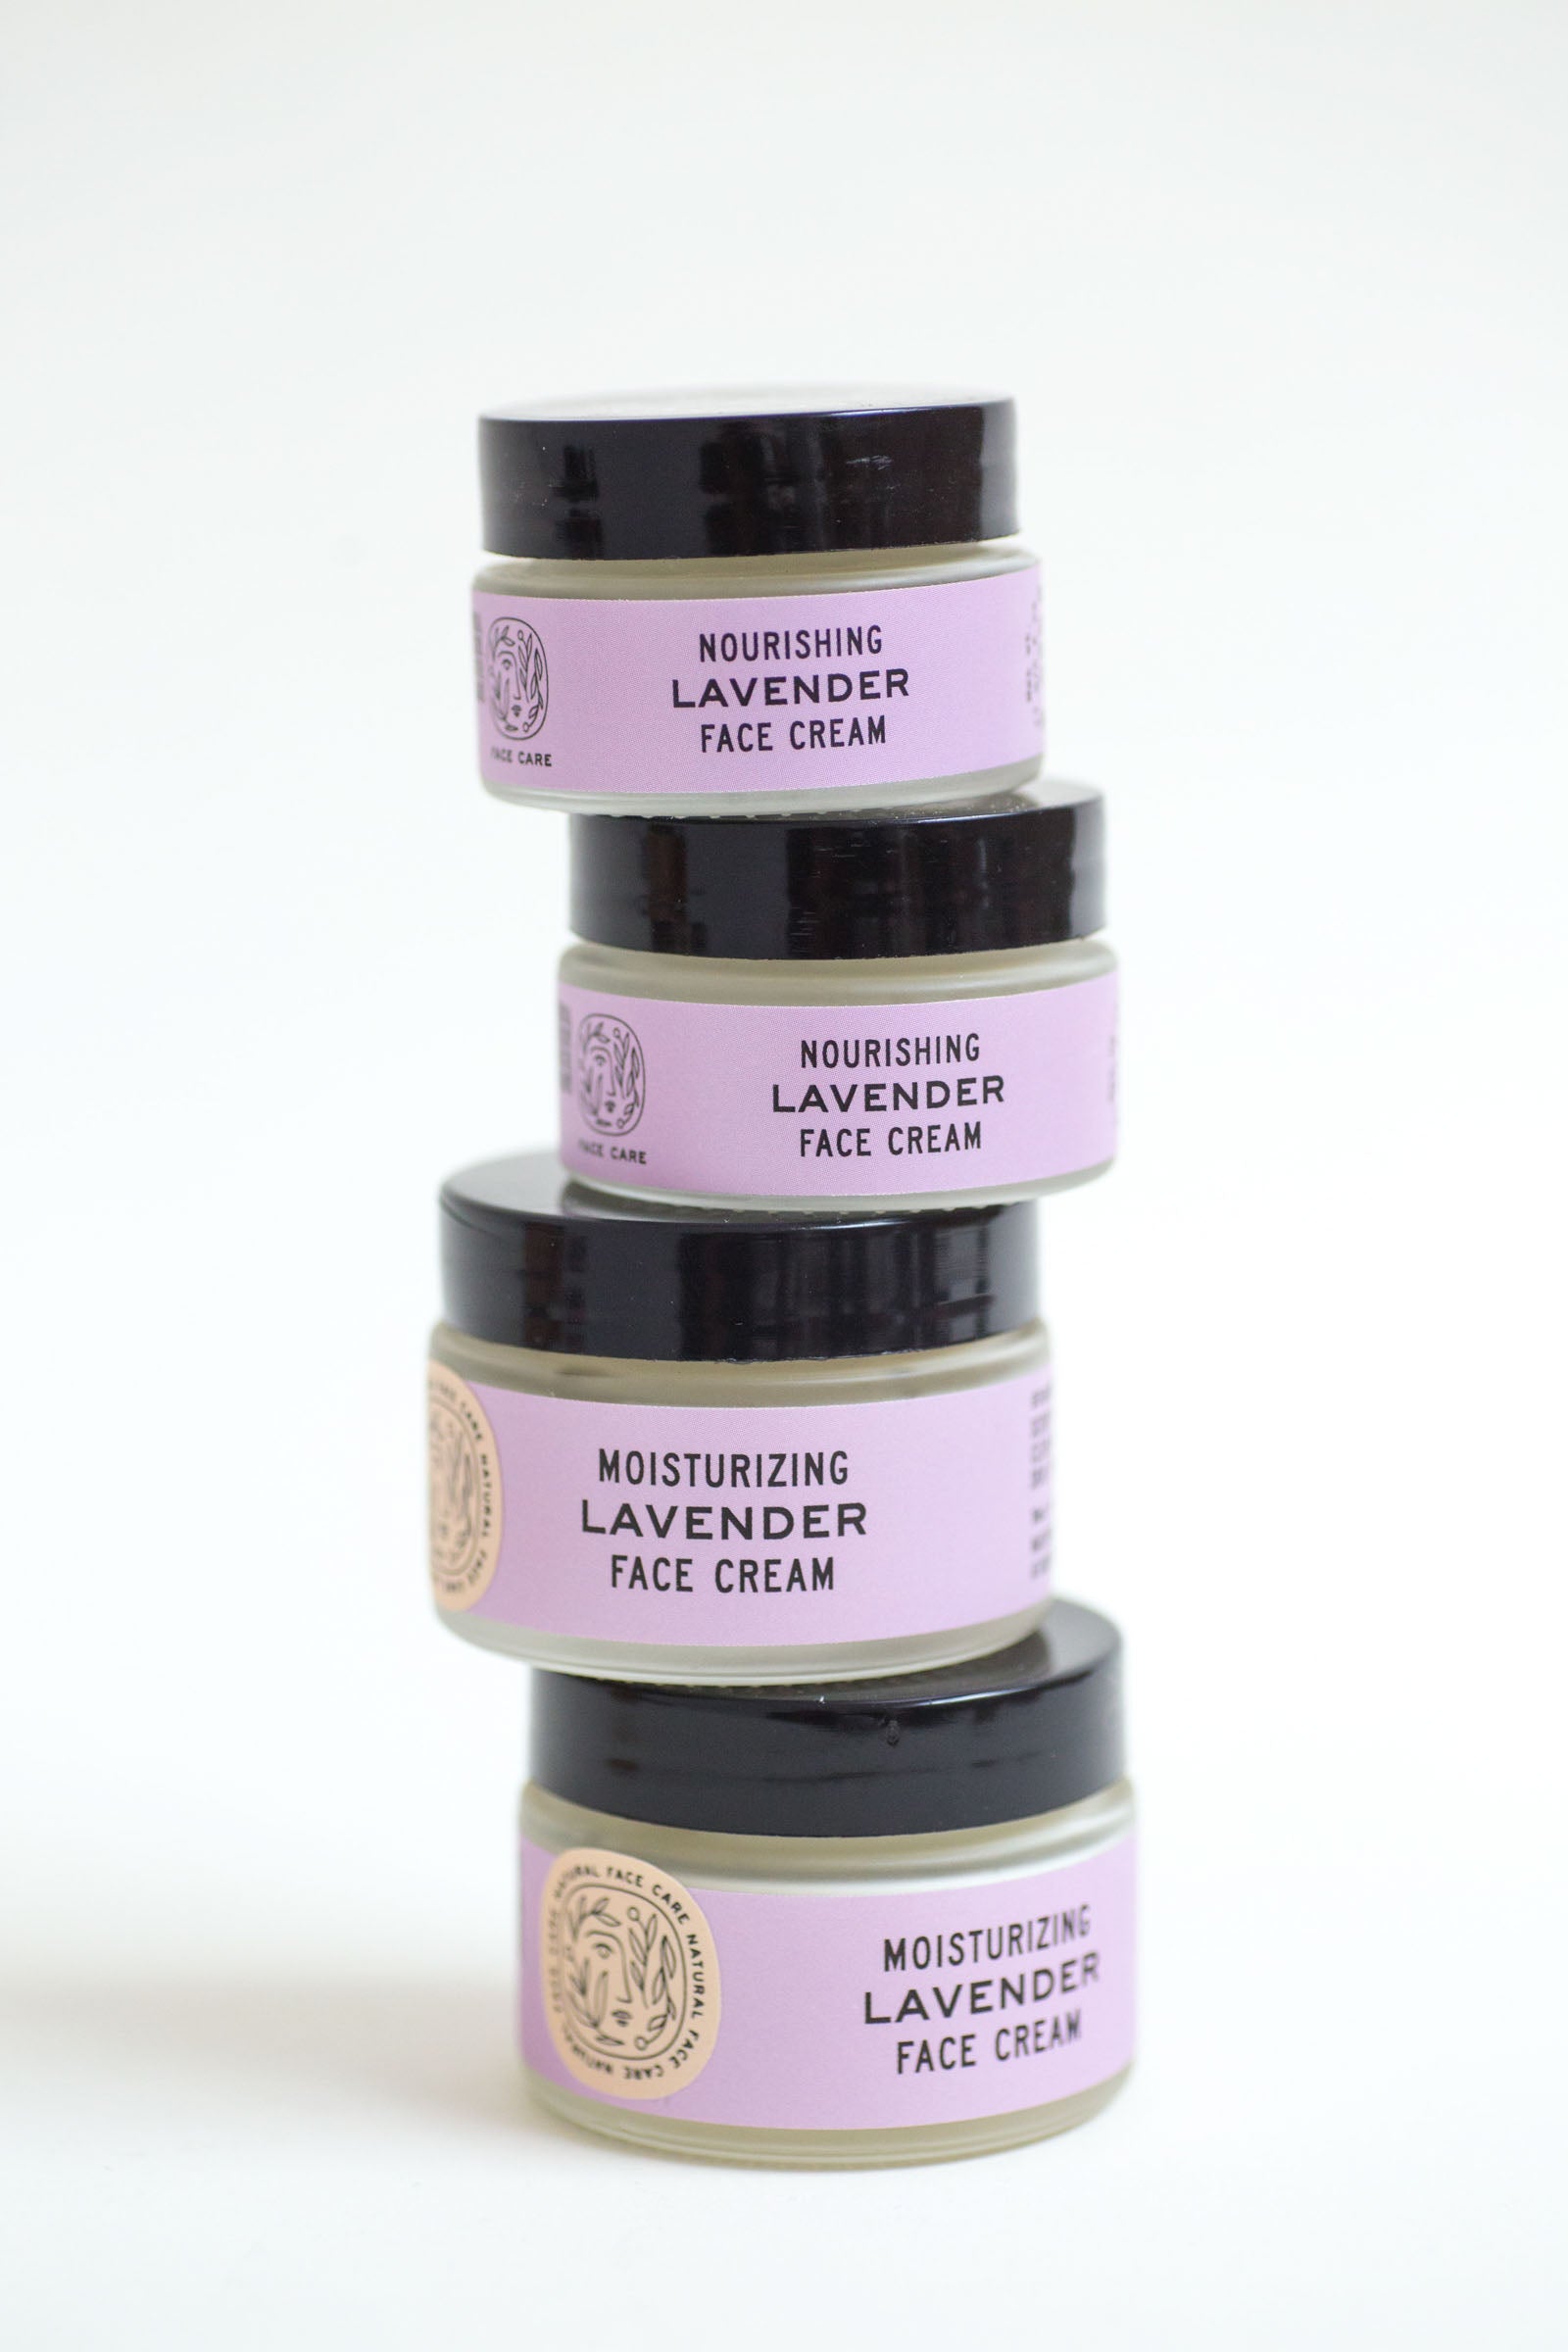 Organic herbal lavender face cream, moisturizing with plant-based oils and butters by Good Flower Farm